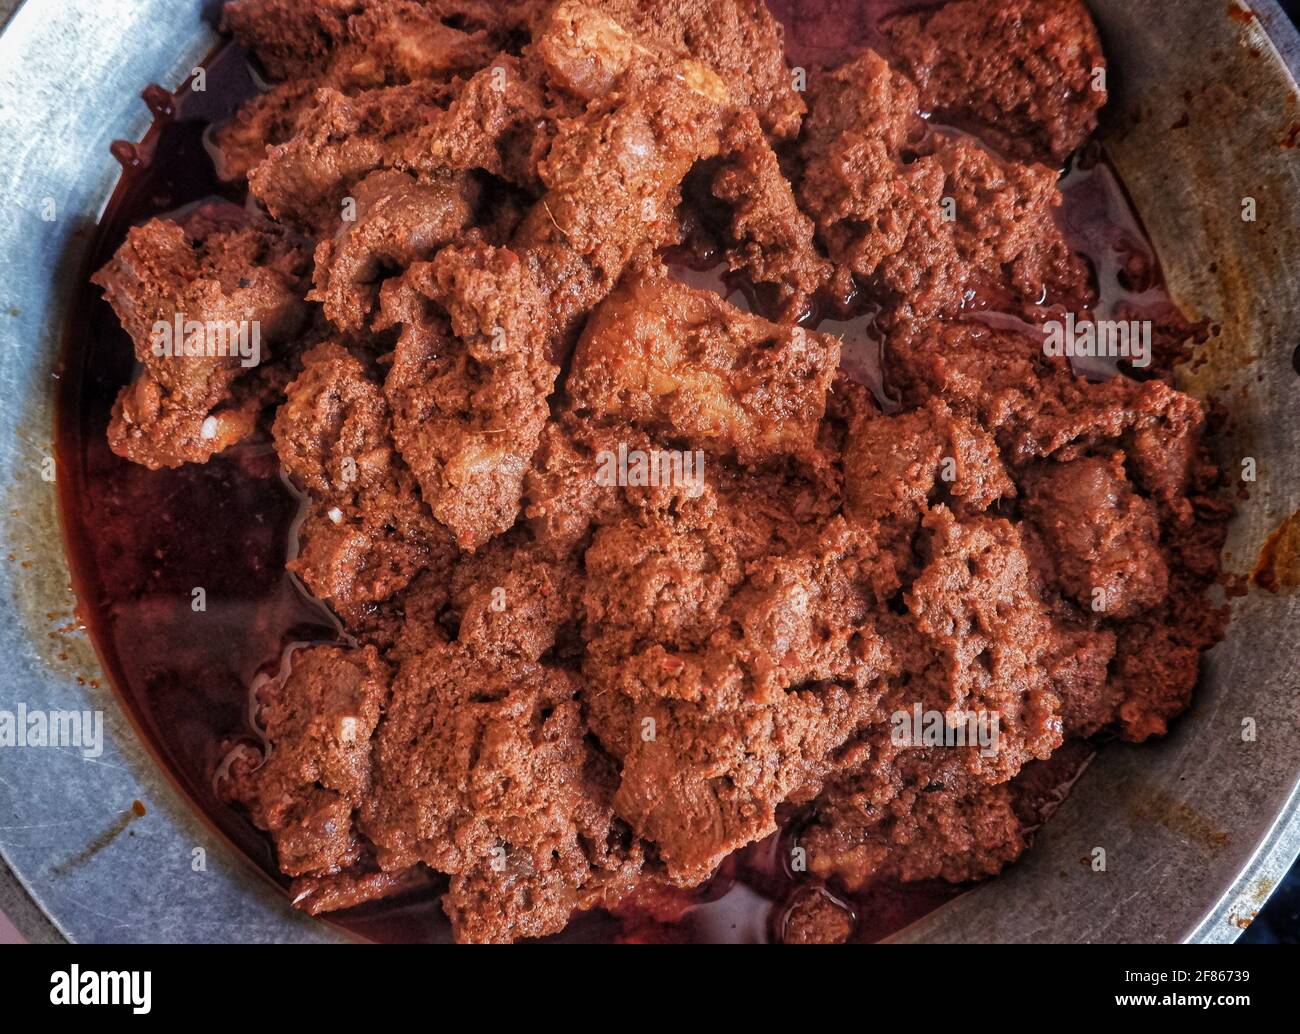 cooked rendang padang an indonesian food made from beef Stock Photo